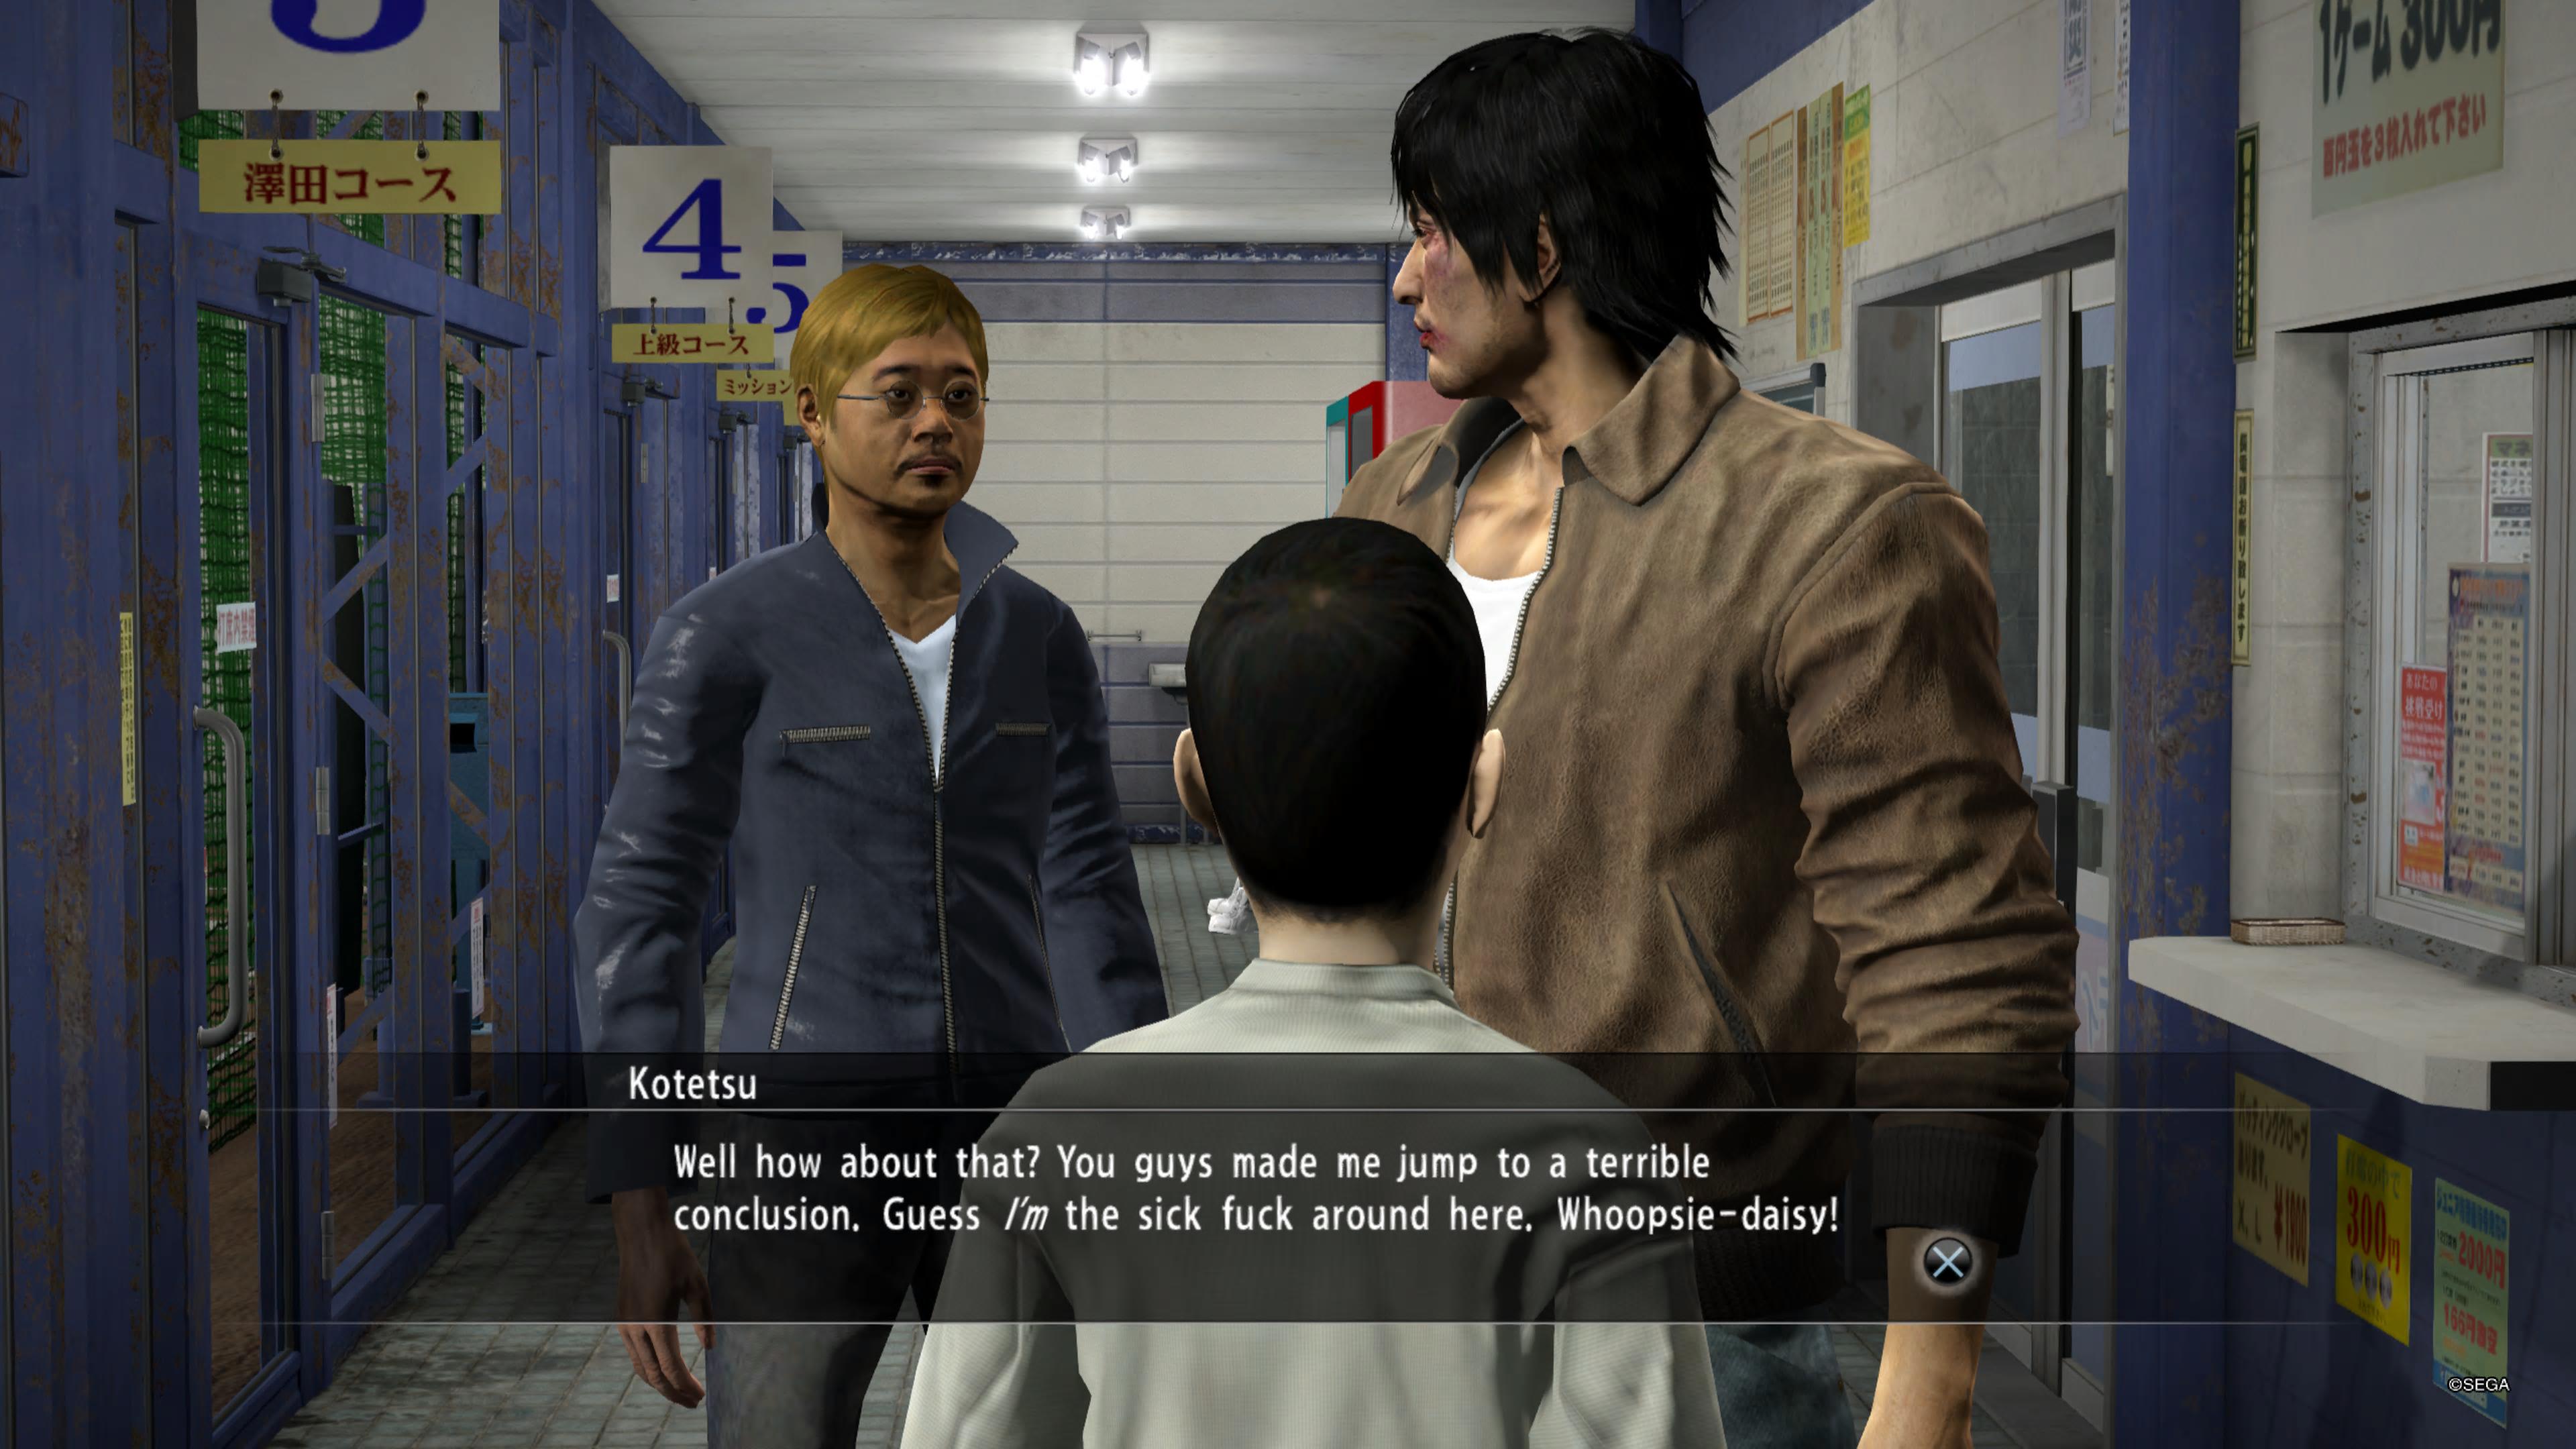 Screenshot from Yakuza 5 featuring a child and a man looking at a third man, who is saying "Well how about that? You guys made me jump to a terrible conclusion. Guess *I'm* the sick fuck around here. Whoopsie daisy!"